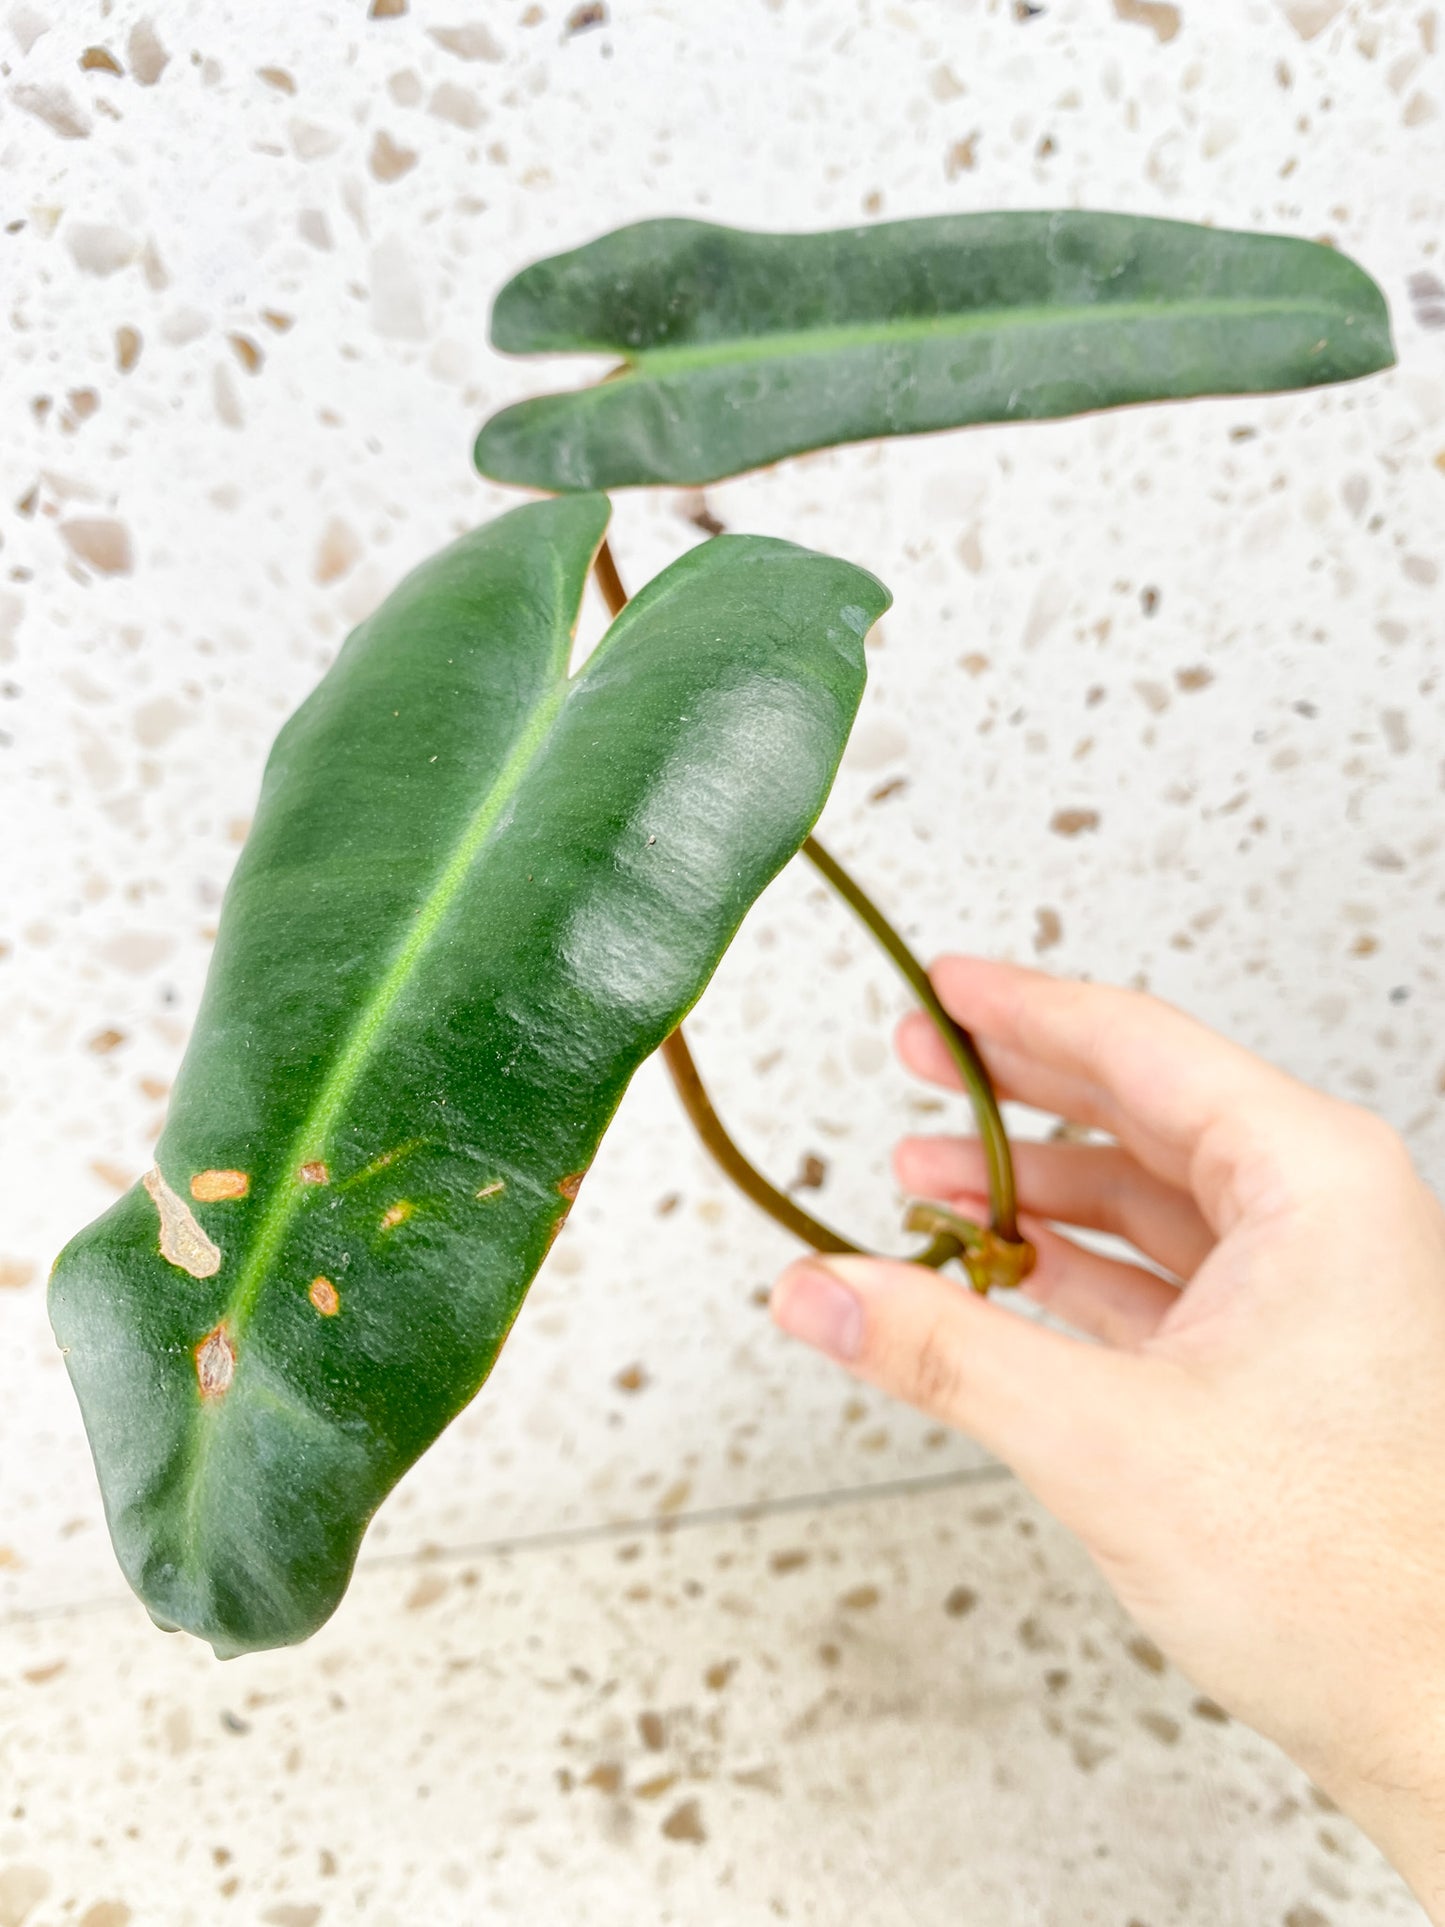 *Philodendron Atabapoense Dark Form 2 leaves (rooting in water)